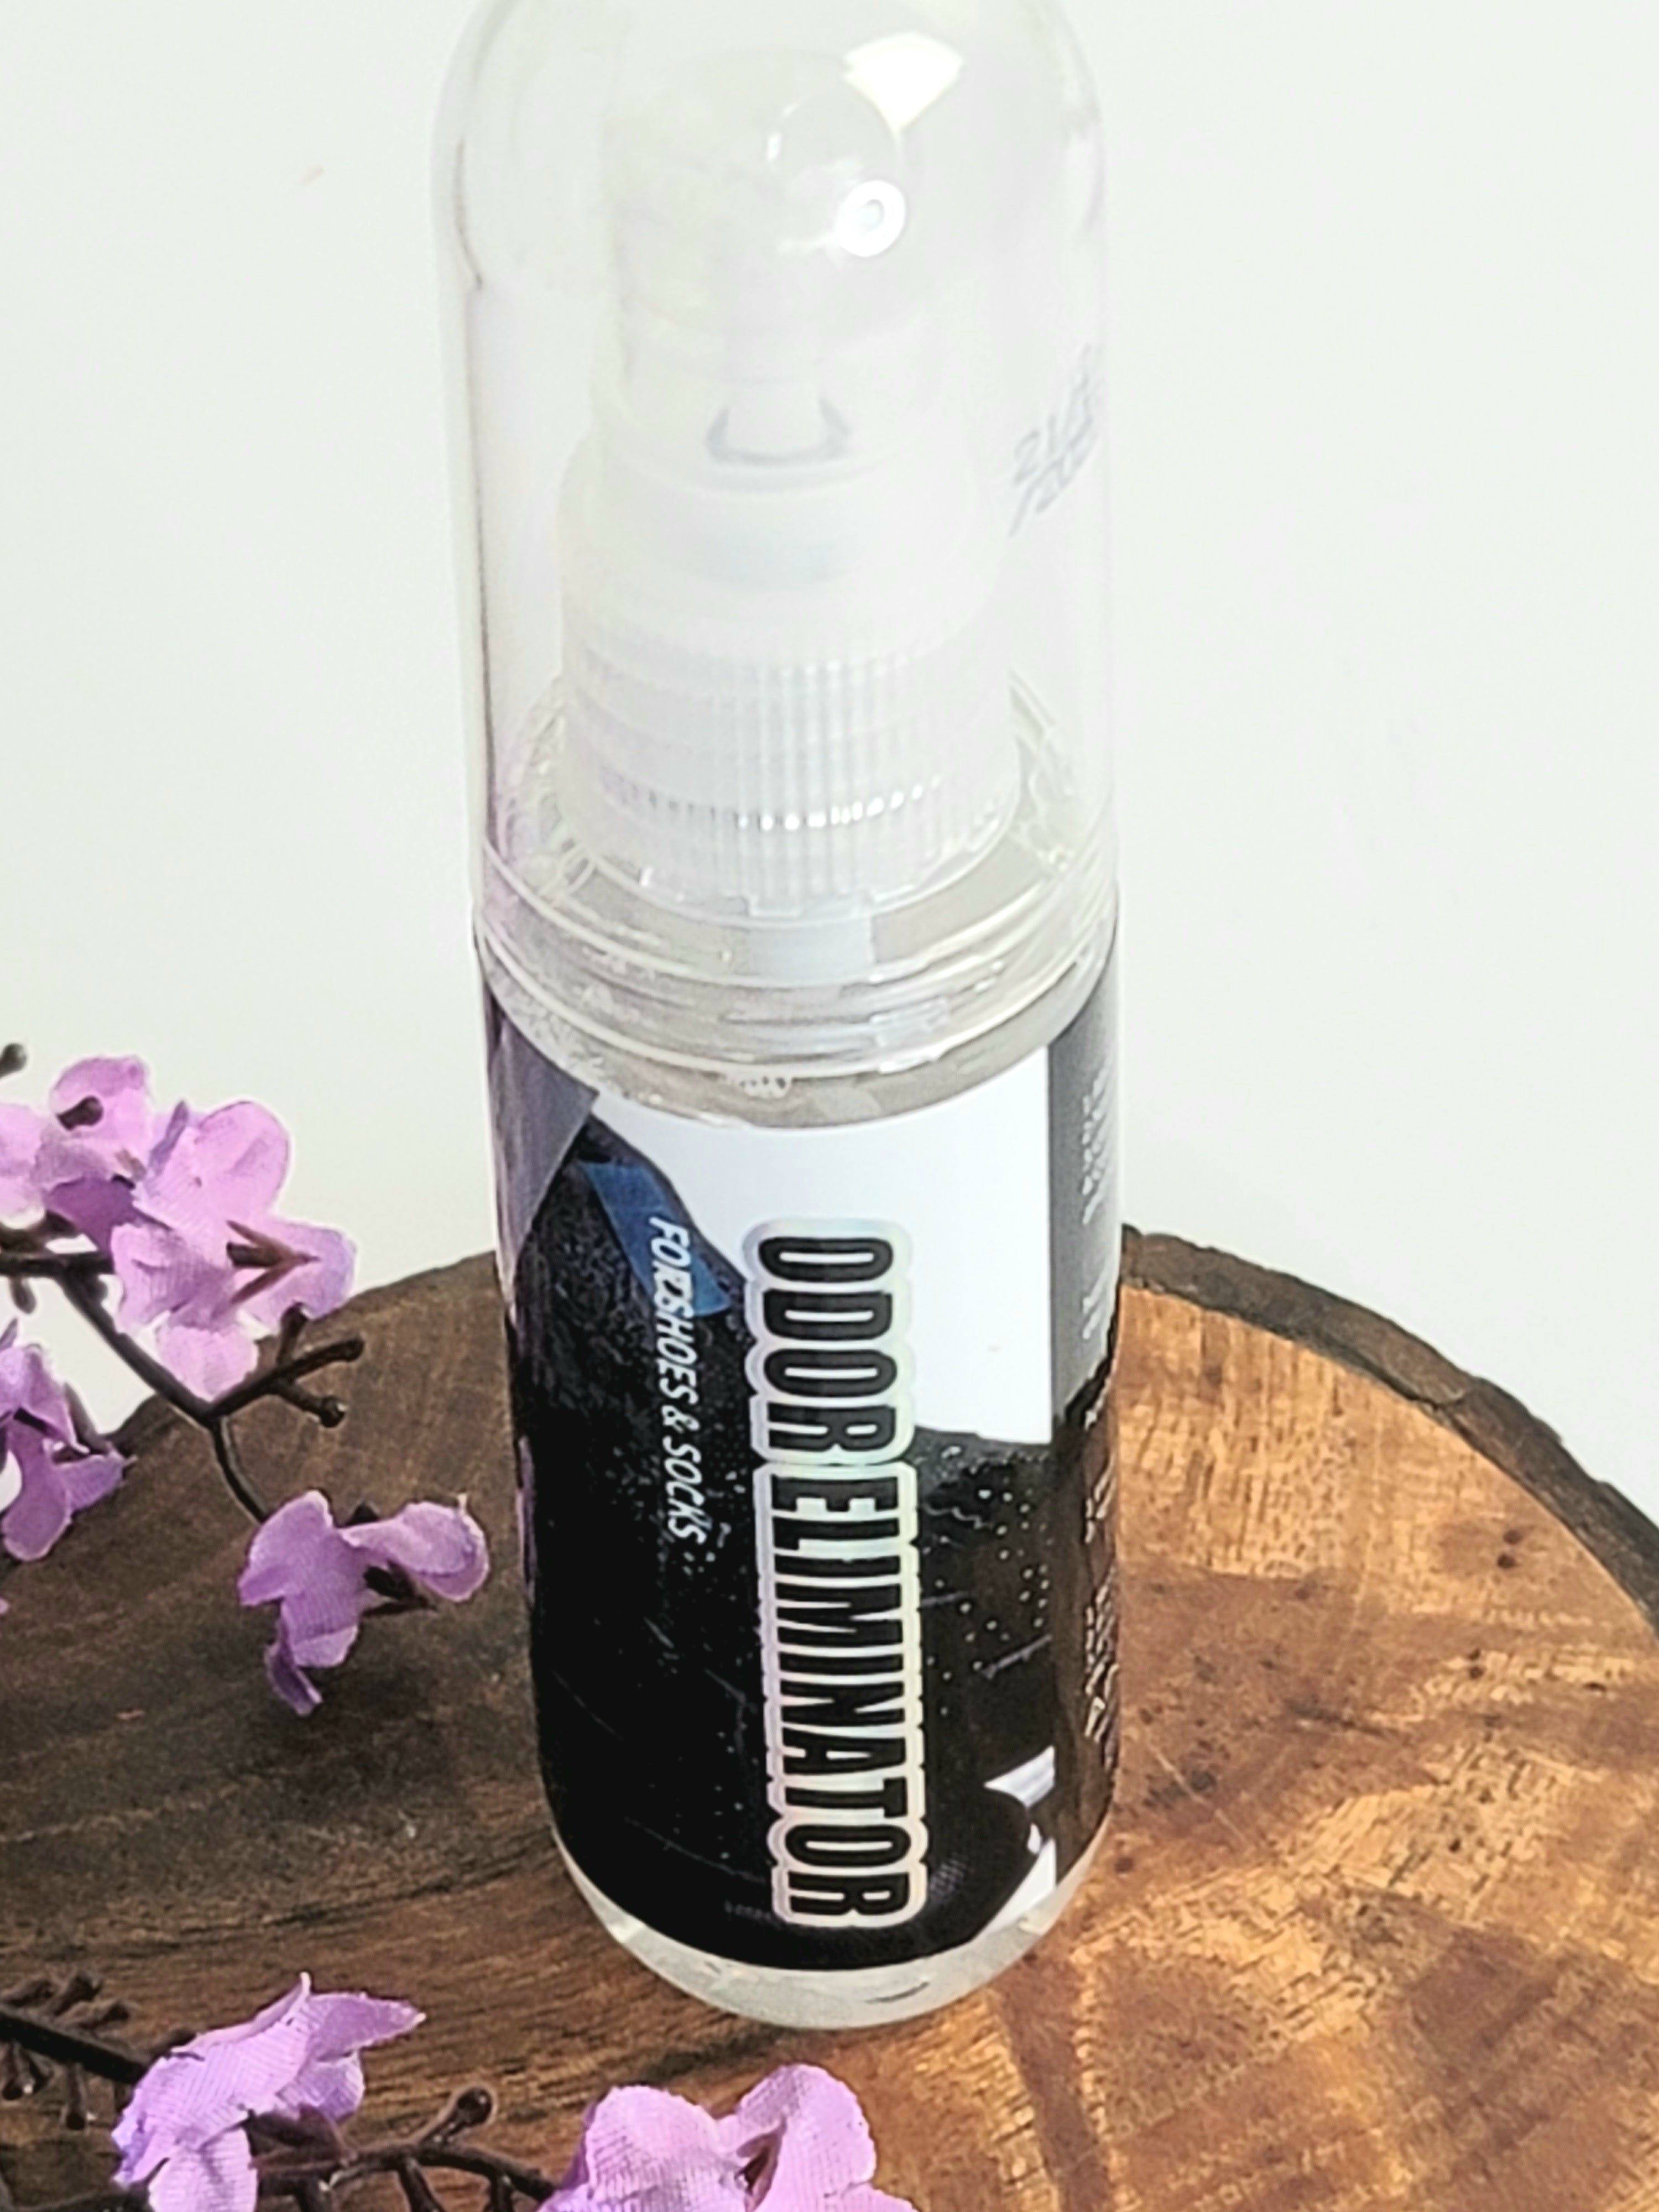 Close up on a bottle of Odor Eliminator from AinaCare sitting on a wooden stump with purple flowers in the bottom left corner.